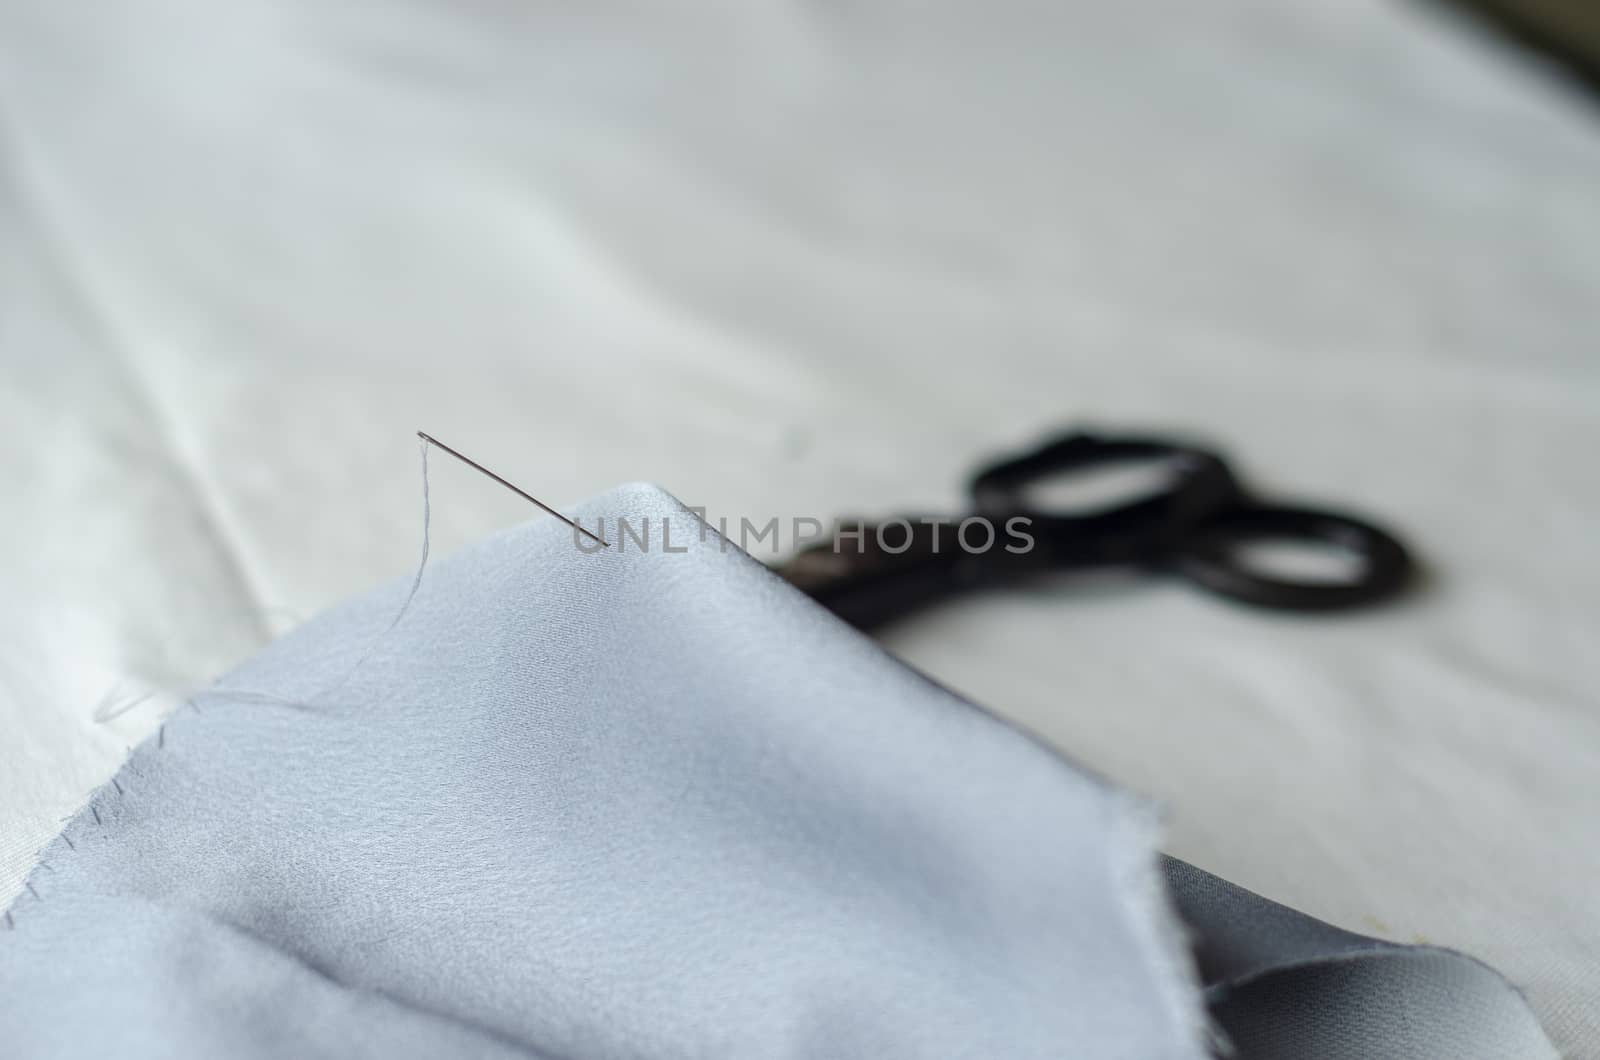 Tailor Sews a Dress 2 by Hasilyus